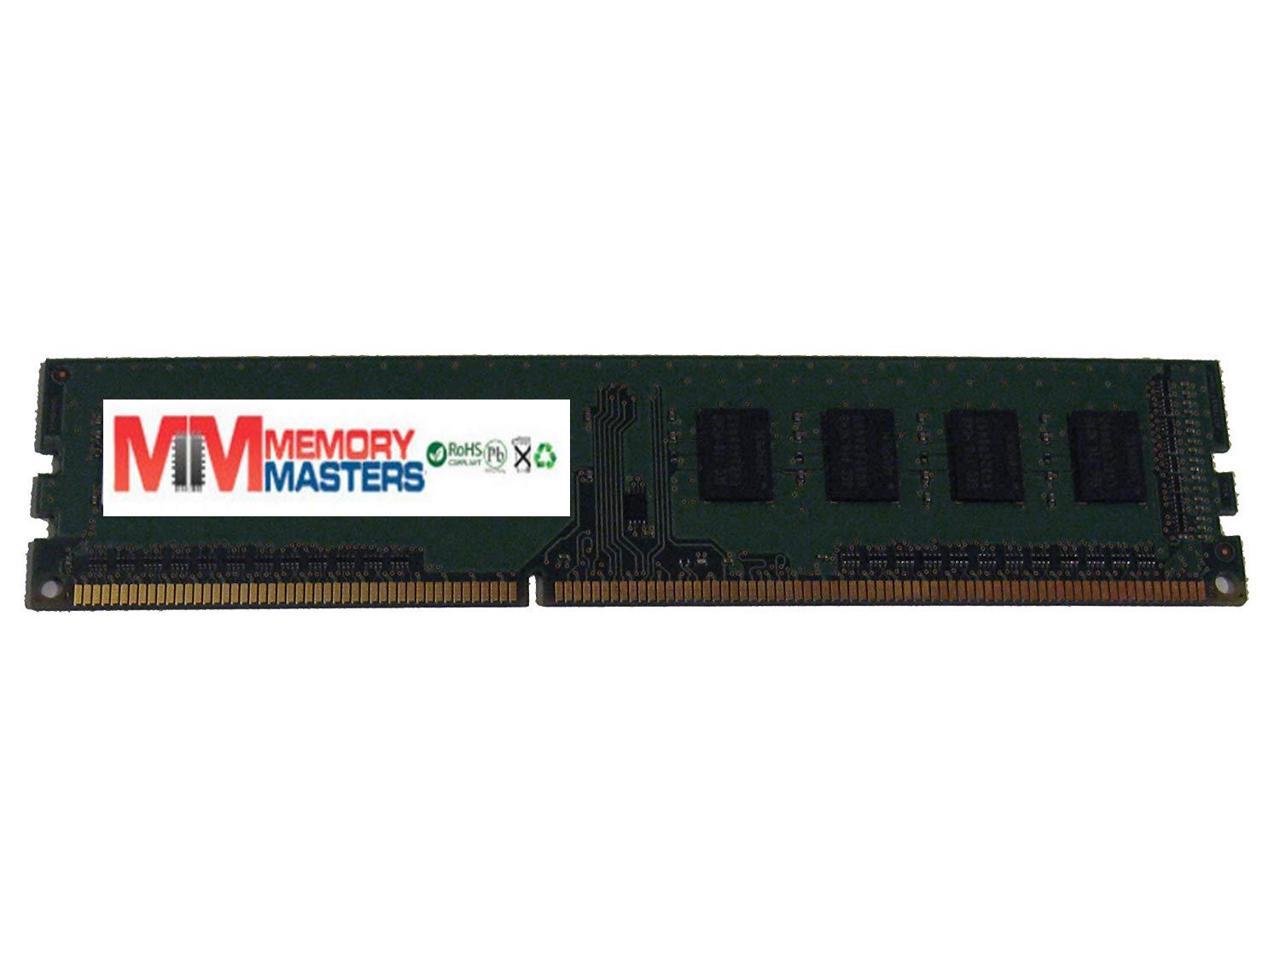 MemoryMasters 8GB DDR3 Memory for HP Workstation Z230 Tower/SFF PC3-12800 1600MHz Non-ECC Desktop DIMM RAM Upgrade